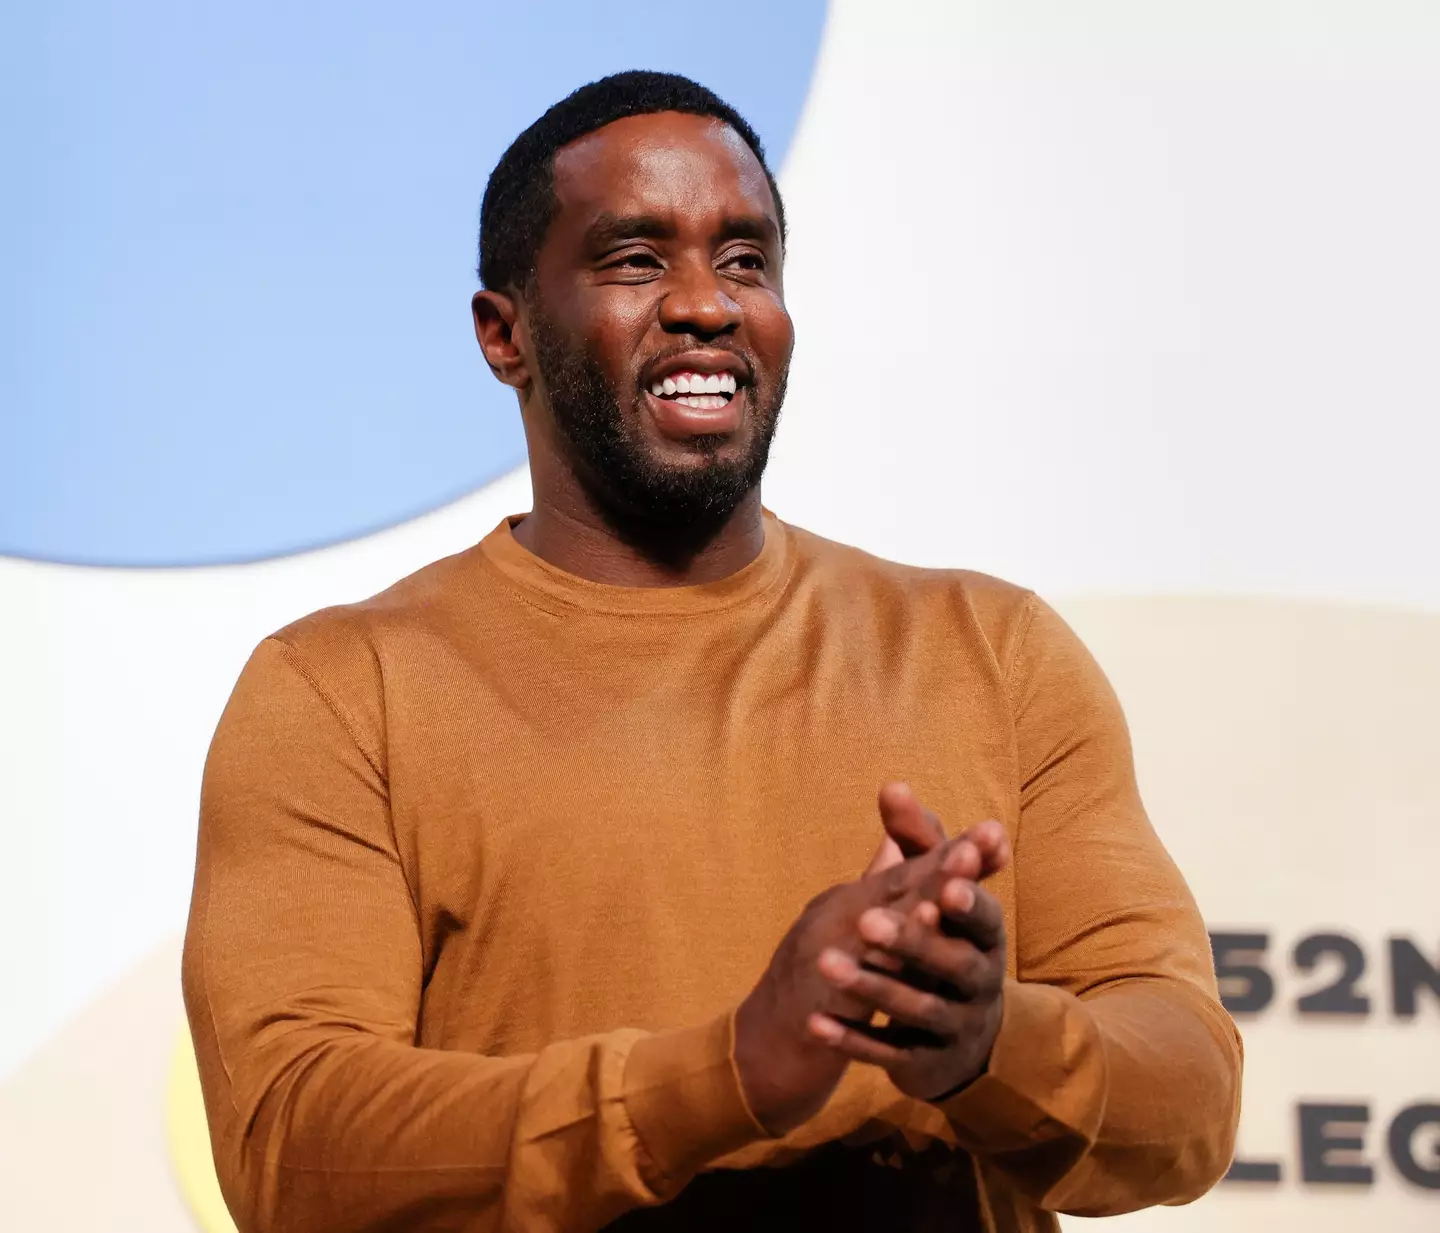 There have been multiple accusations made against Sean 'Diddy' Combs.